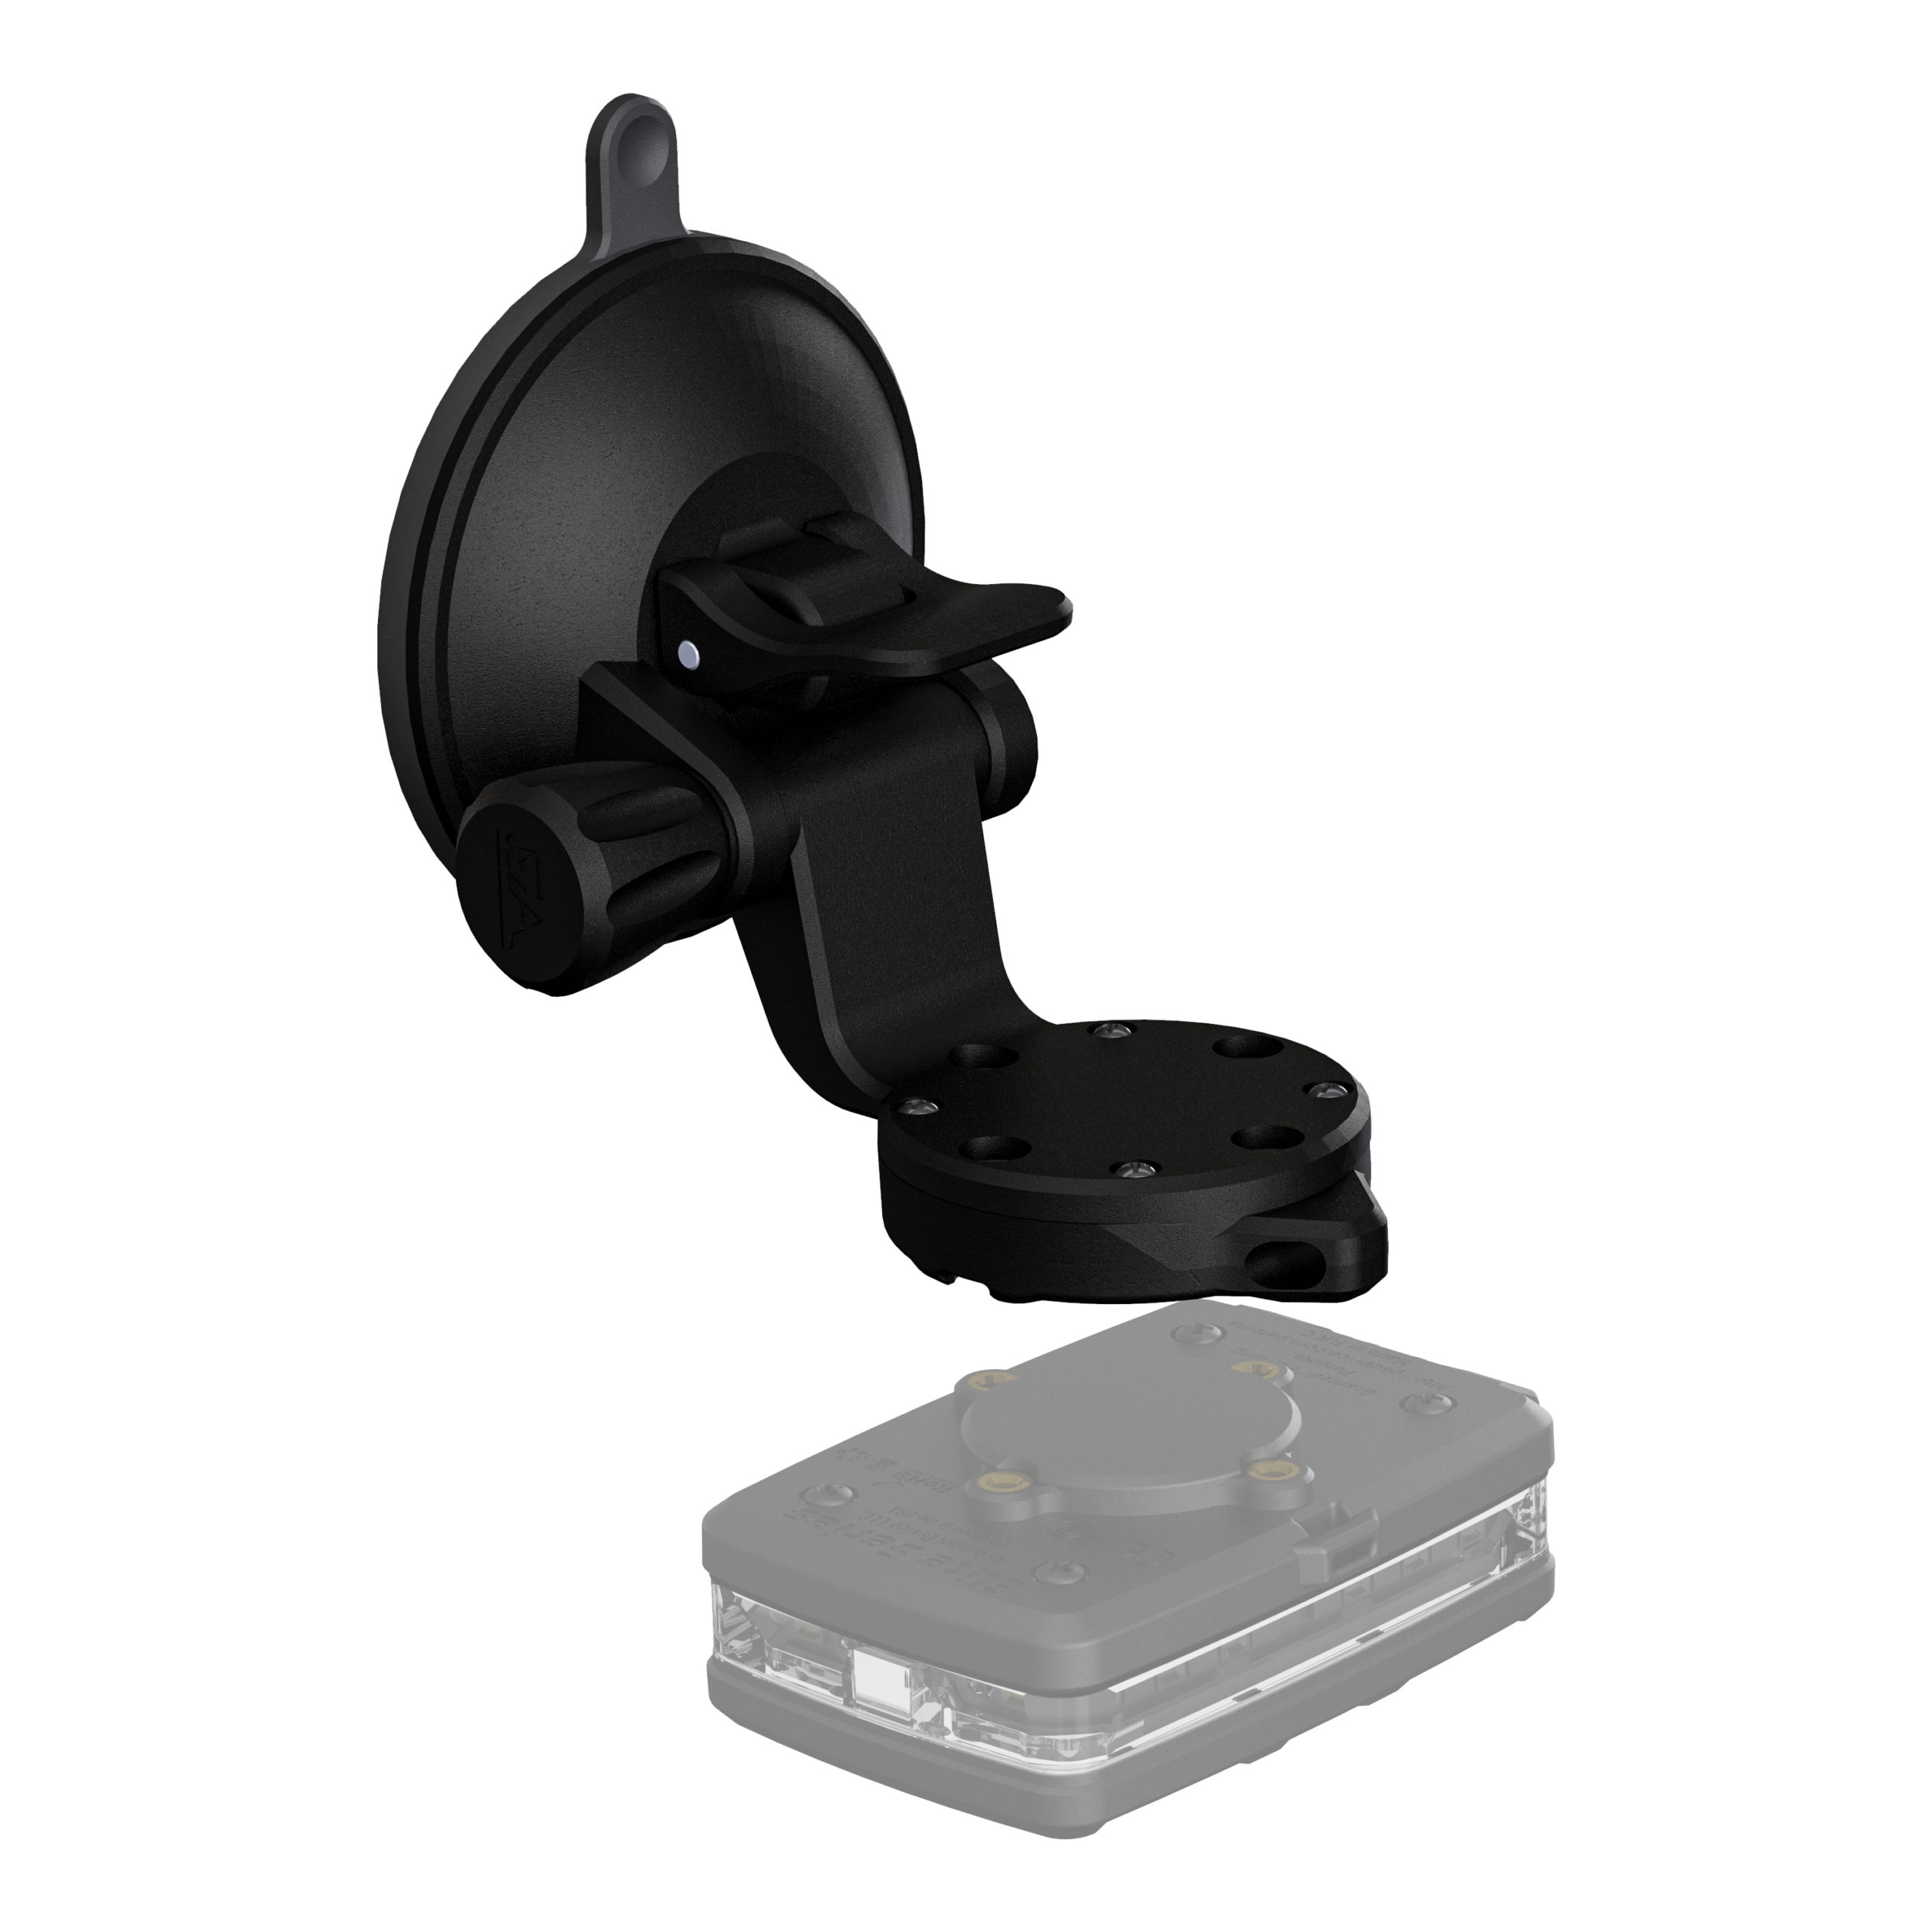 The XCLEAR Nano-Suction Mount.